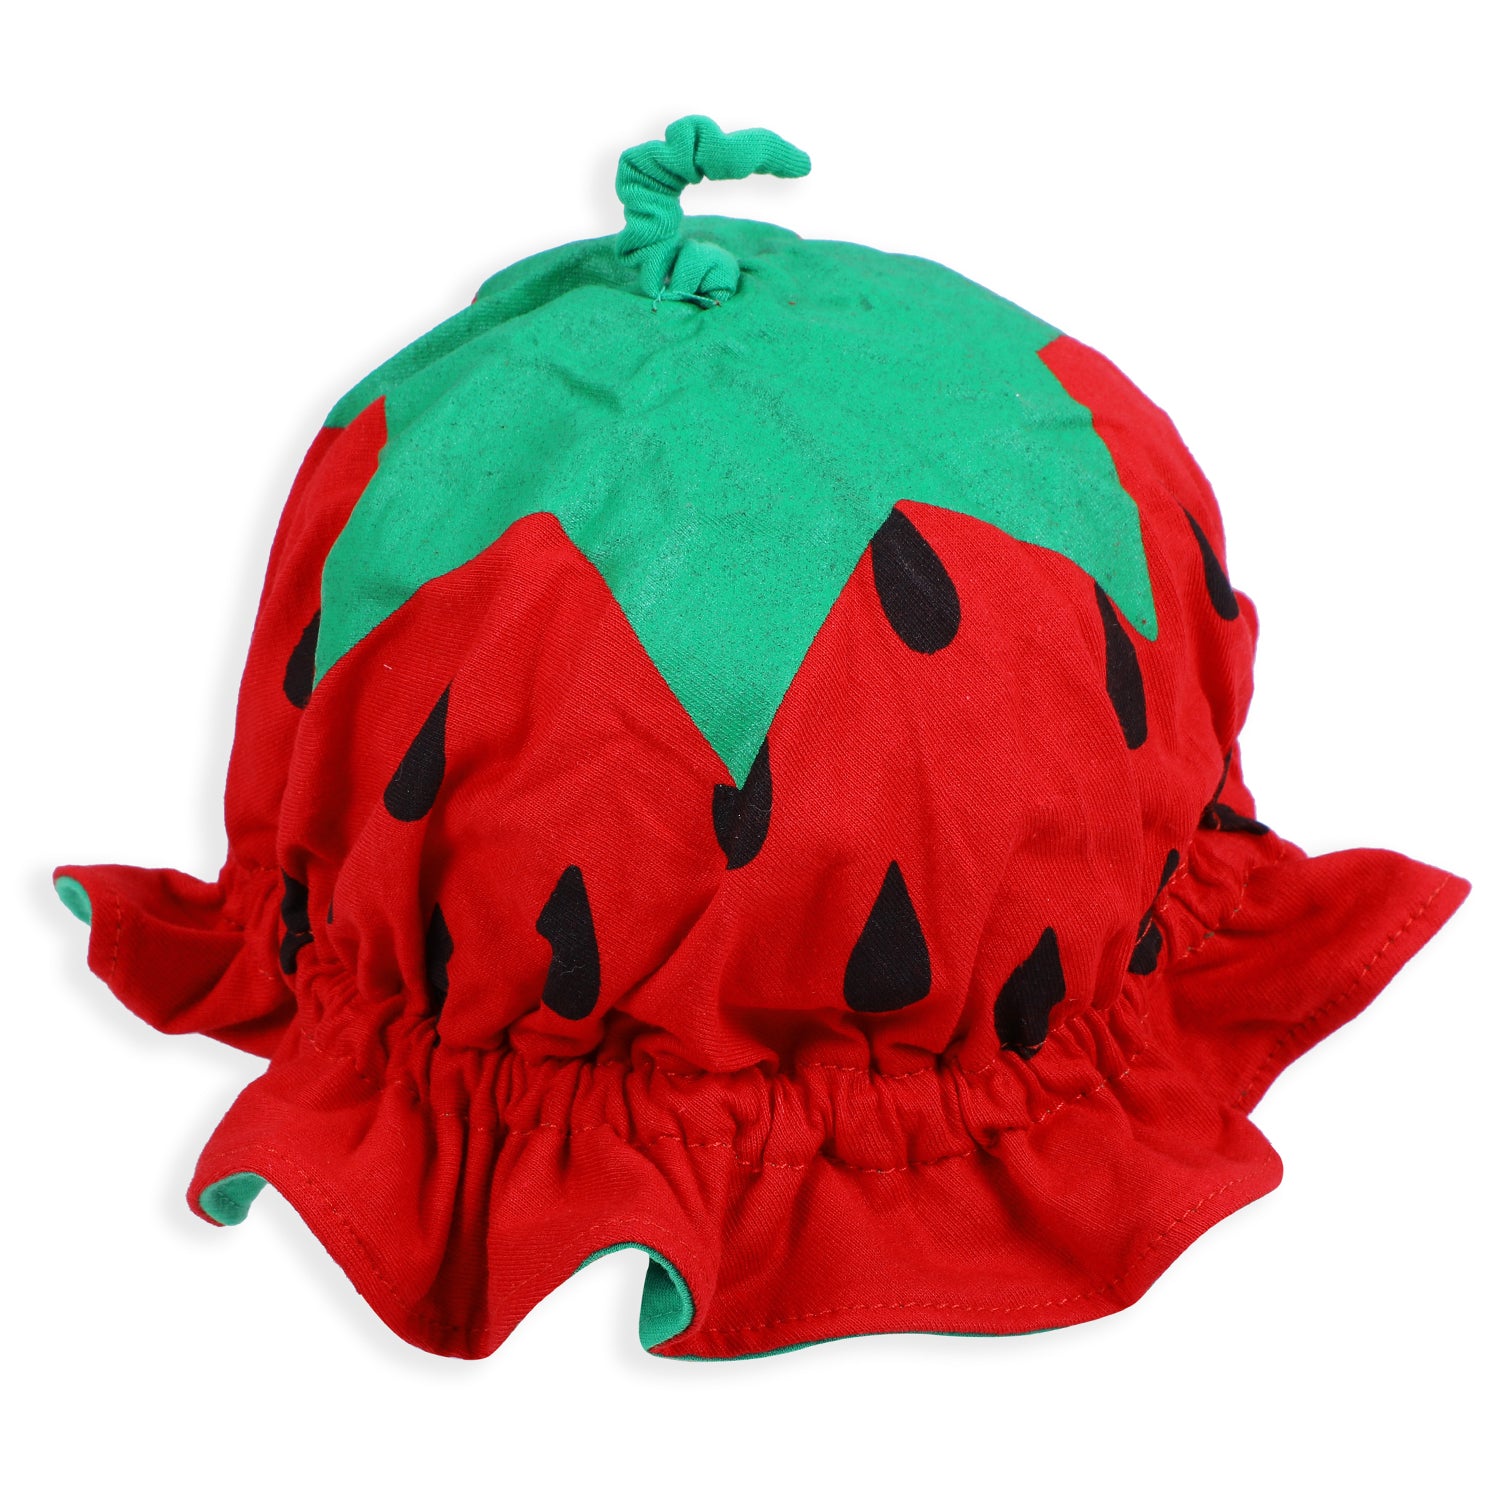 Baby Moo Stylish Strawberry Costume 2pcs Cap And Fancy Dress - Red - Baby Moo